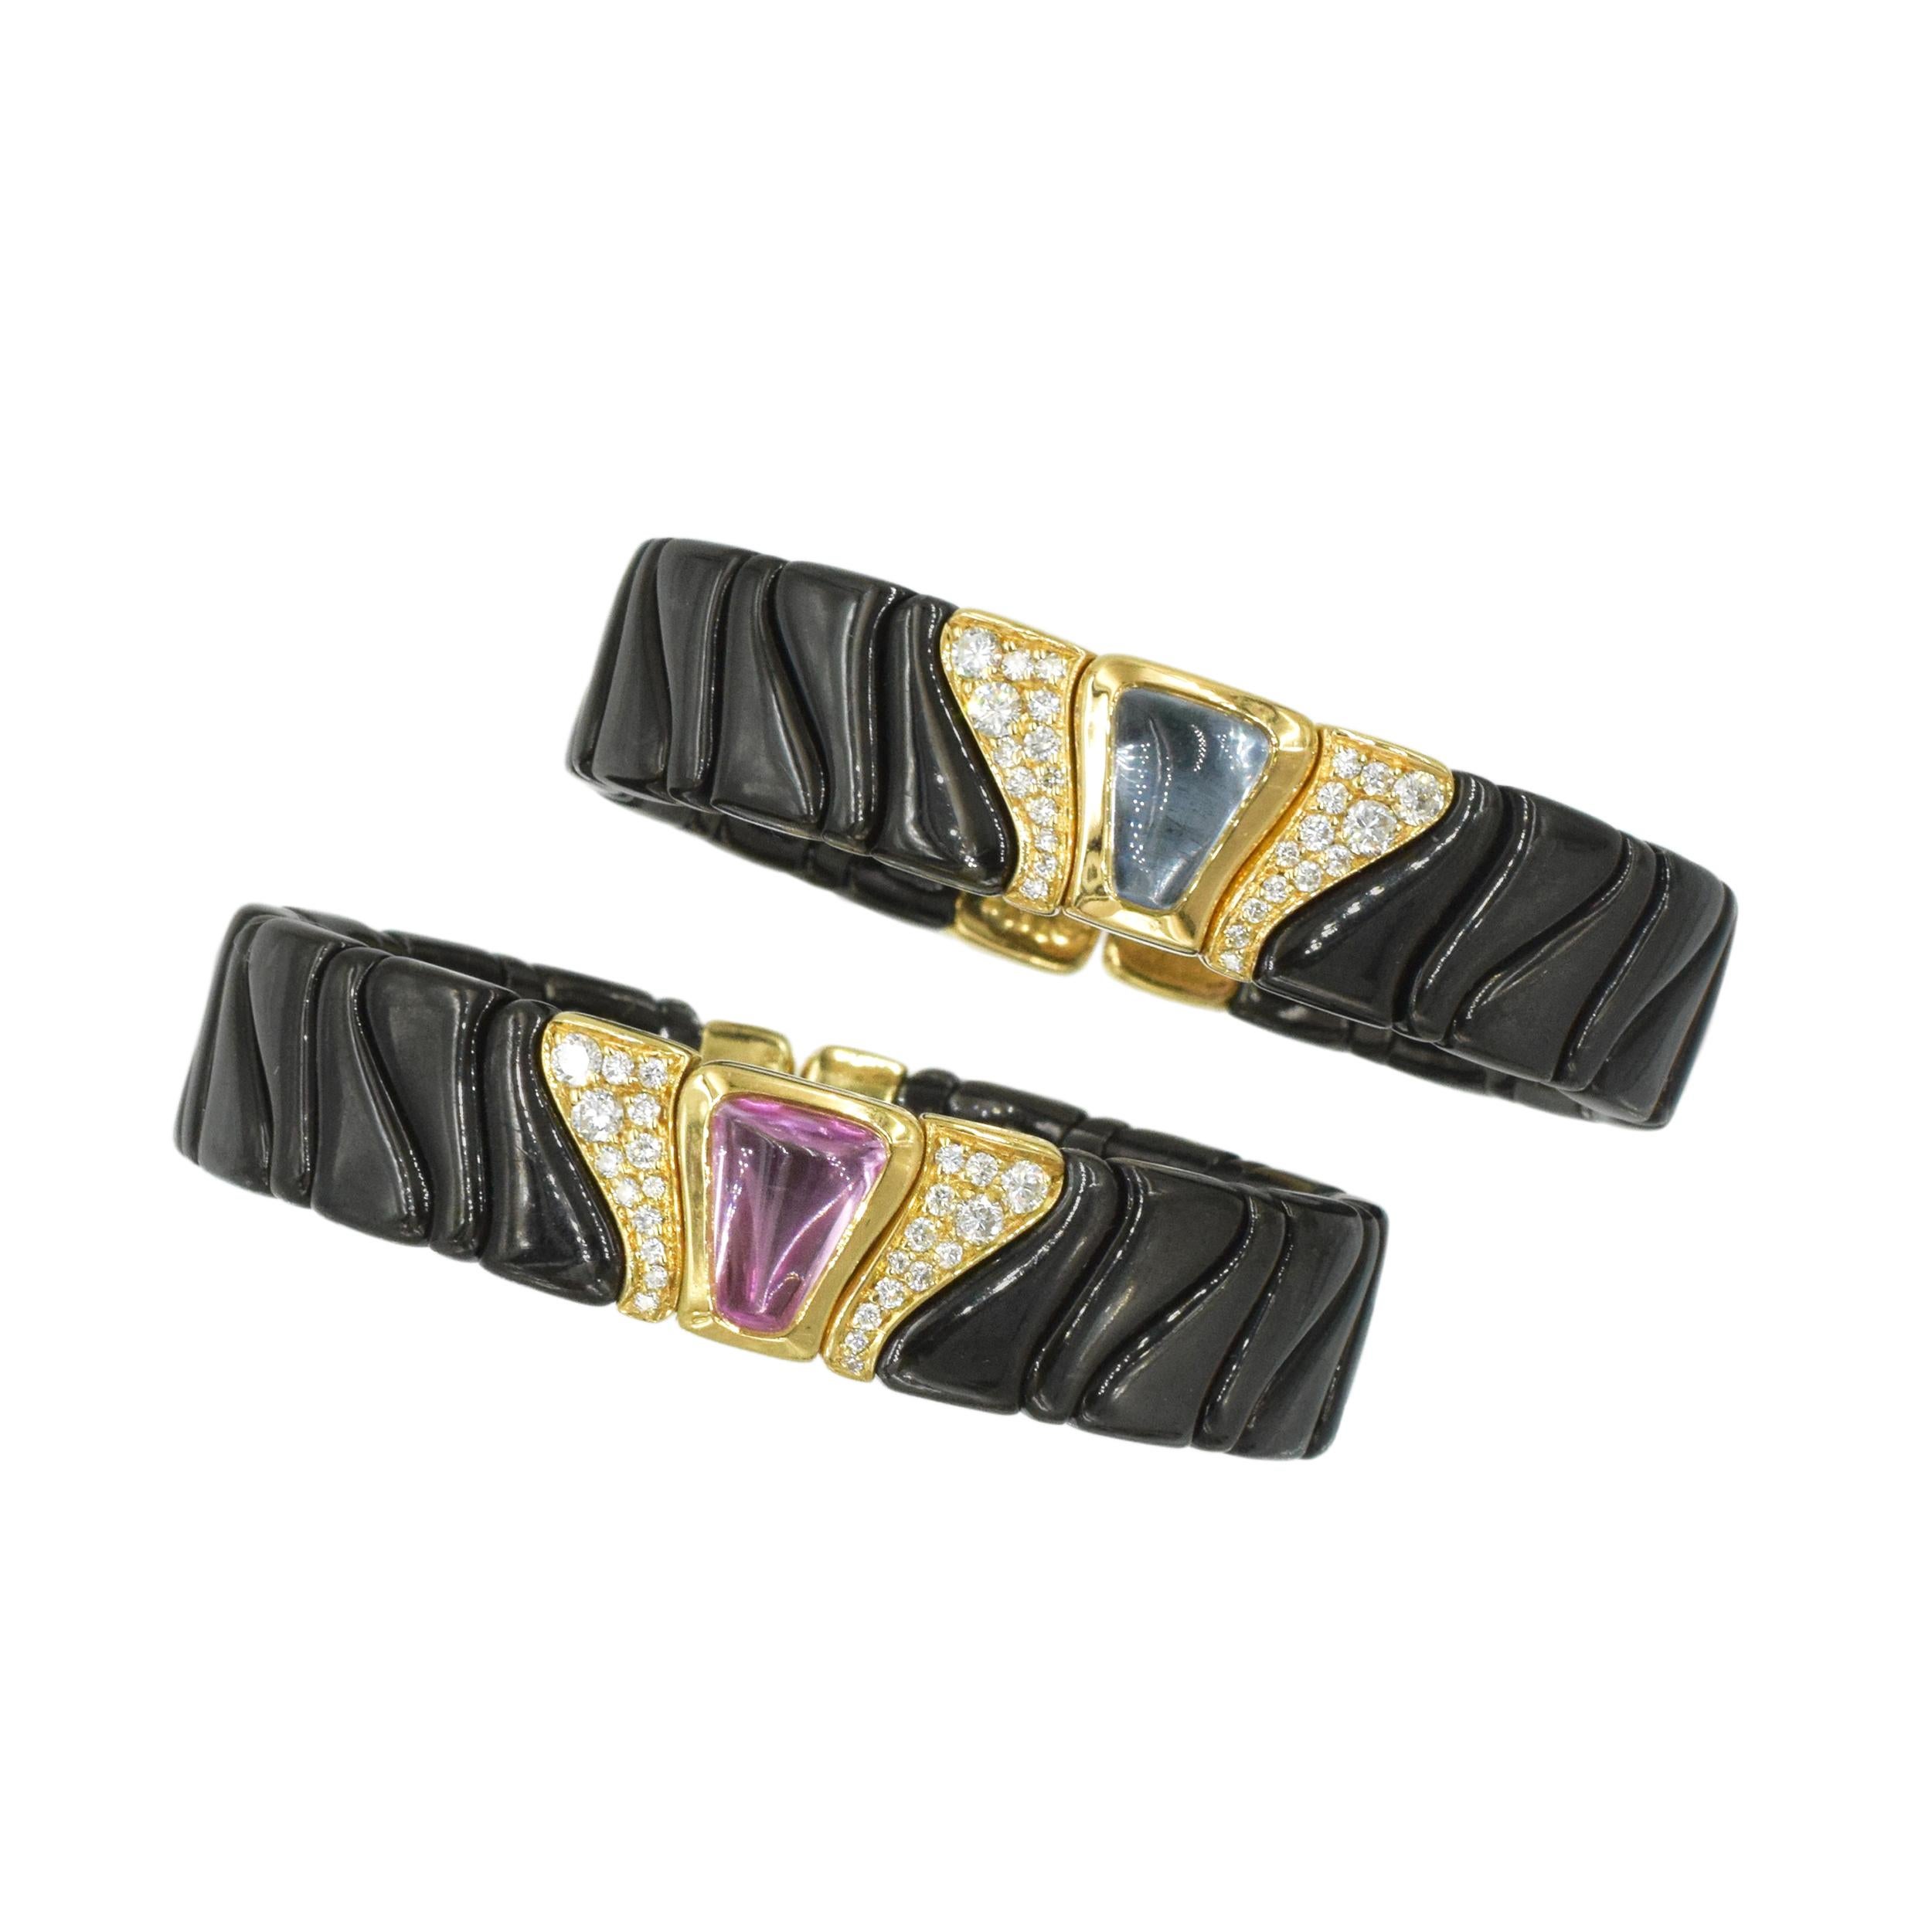 Set of two Marina B Black and yellow gold cuff braceletts with diamond and topaz accents. 
These flexible bracelets consist of multiple black gold links mounted on a steel spring. Centerpieces of the bracelets feature three yellow gold links, center